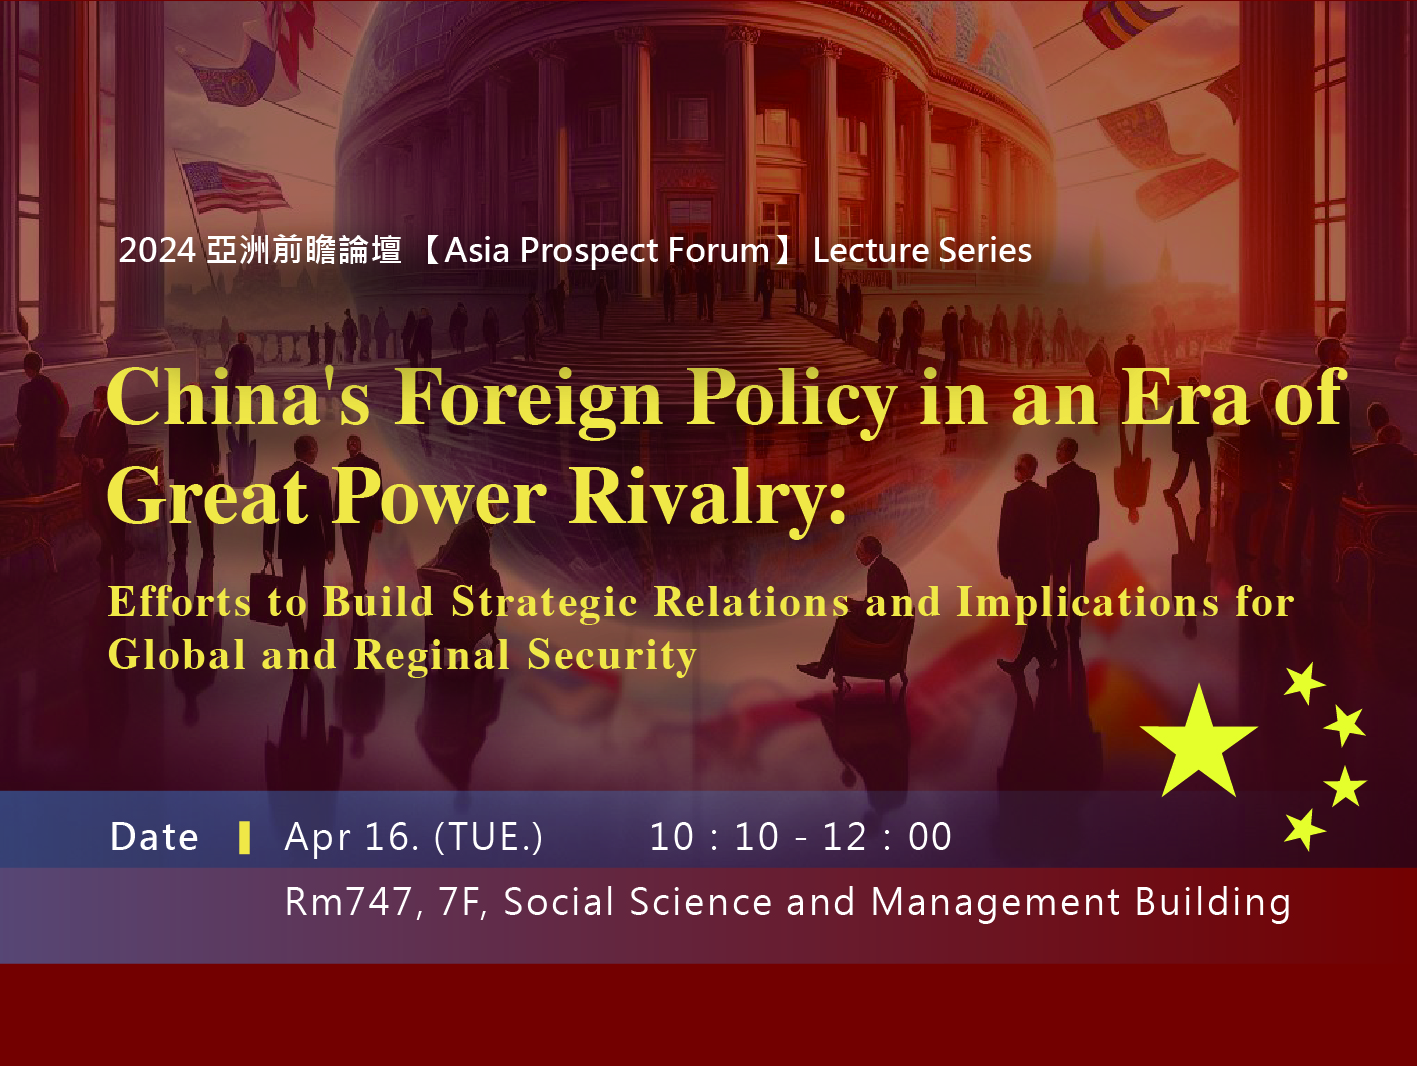 China's Foreign Policy in an Era of Great Power Rivalry